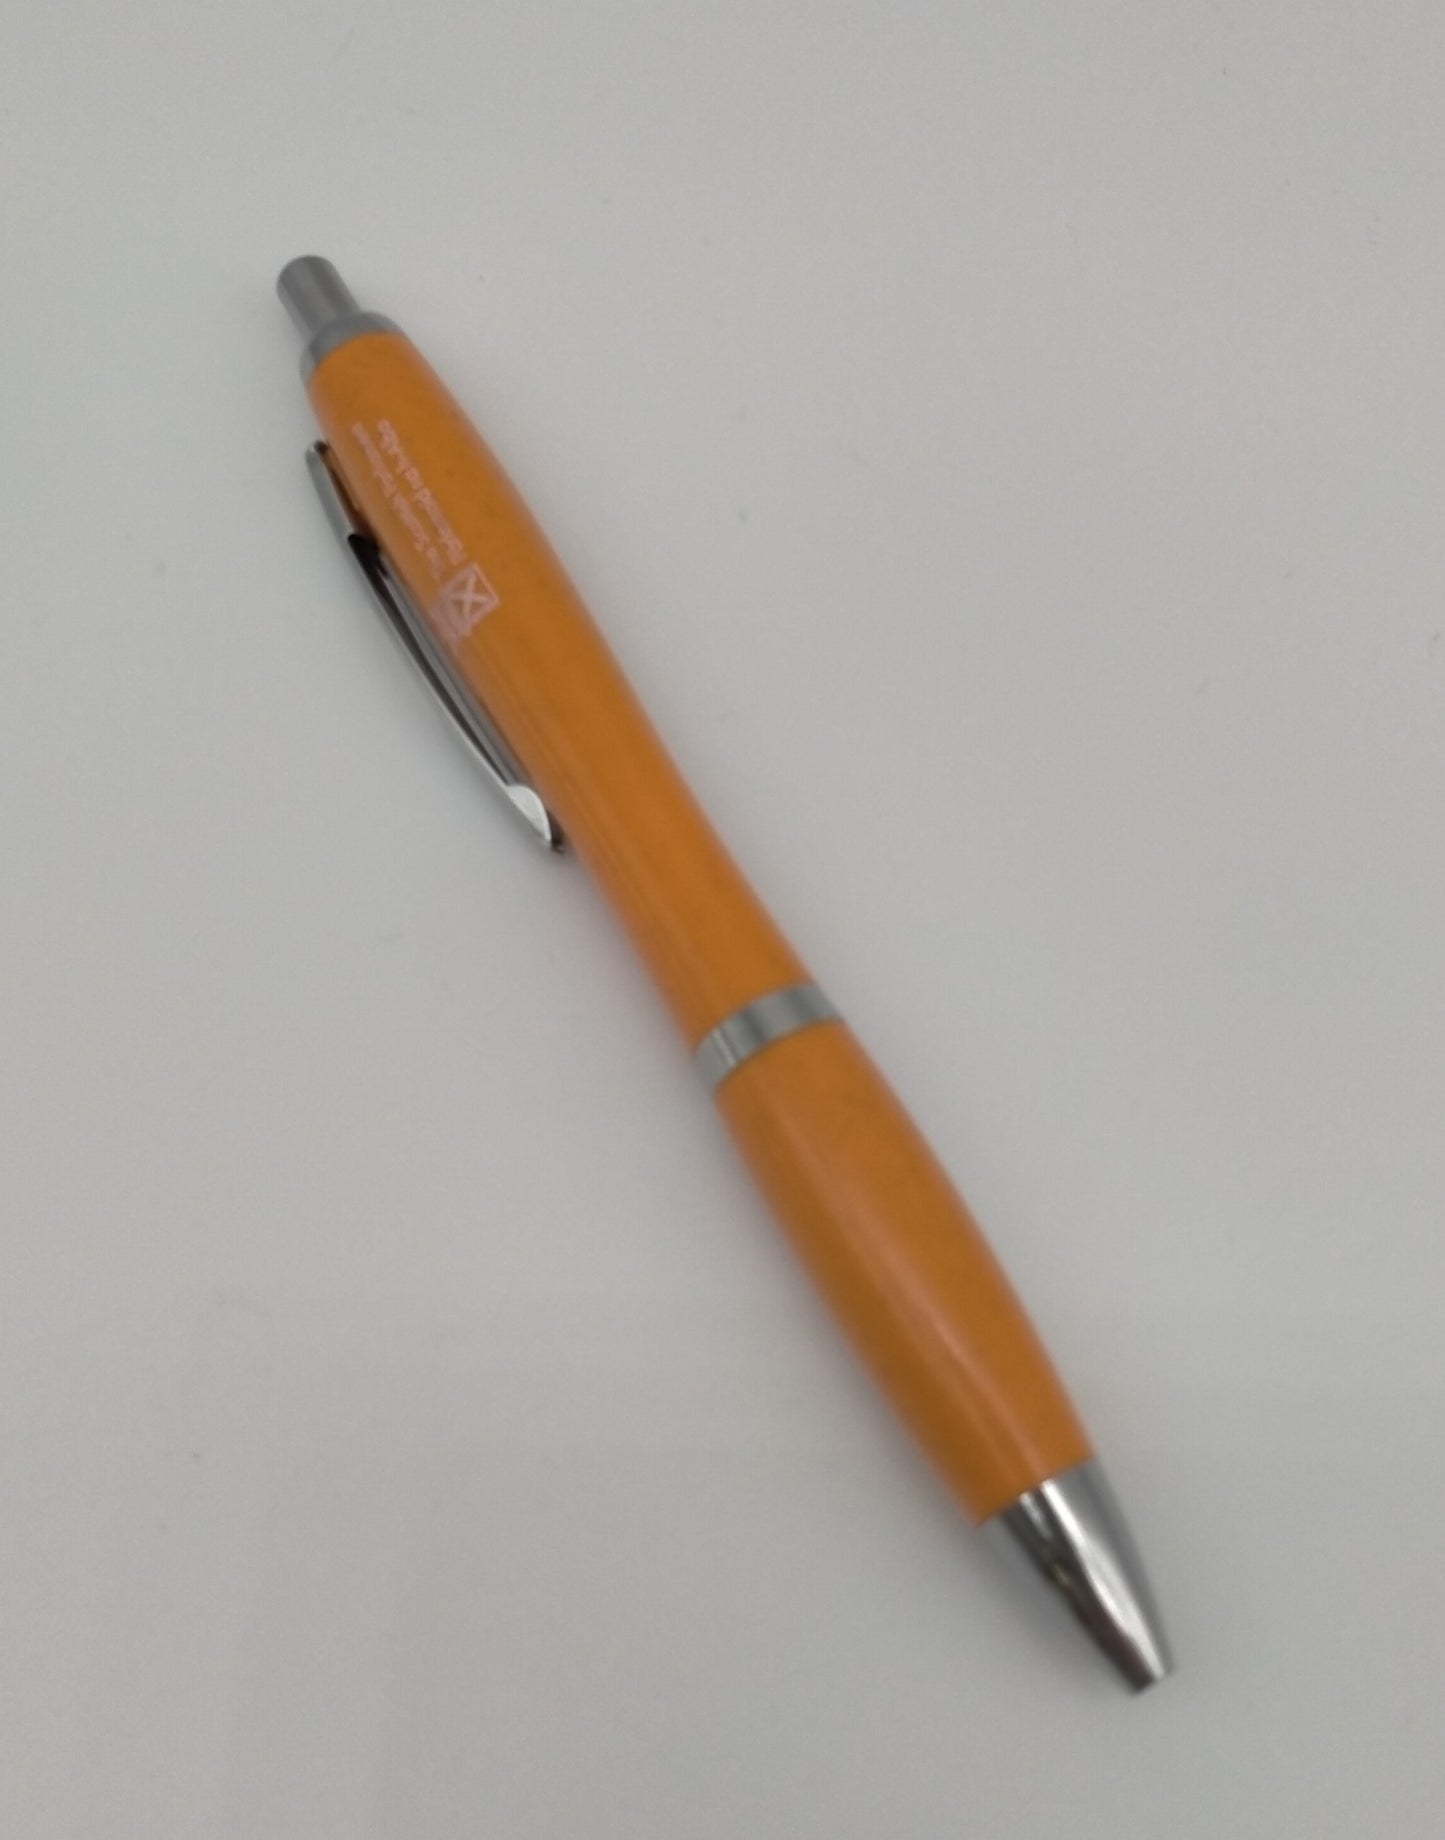 Orange pen decorated with the symbol of the Scottish Parliament with silver elements.